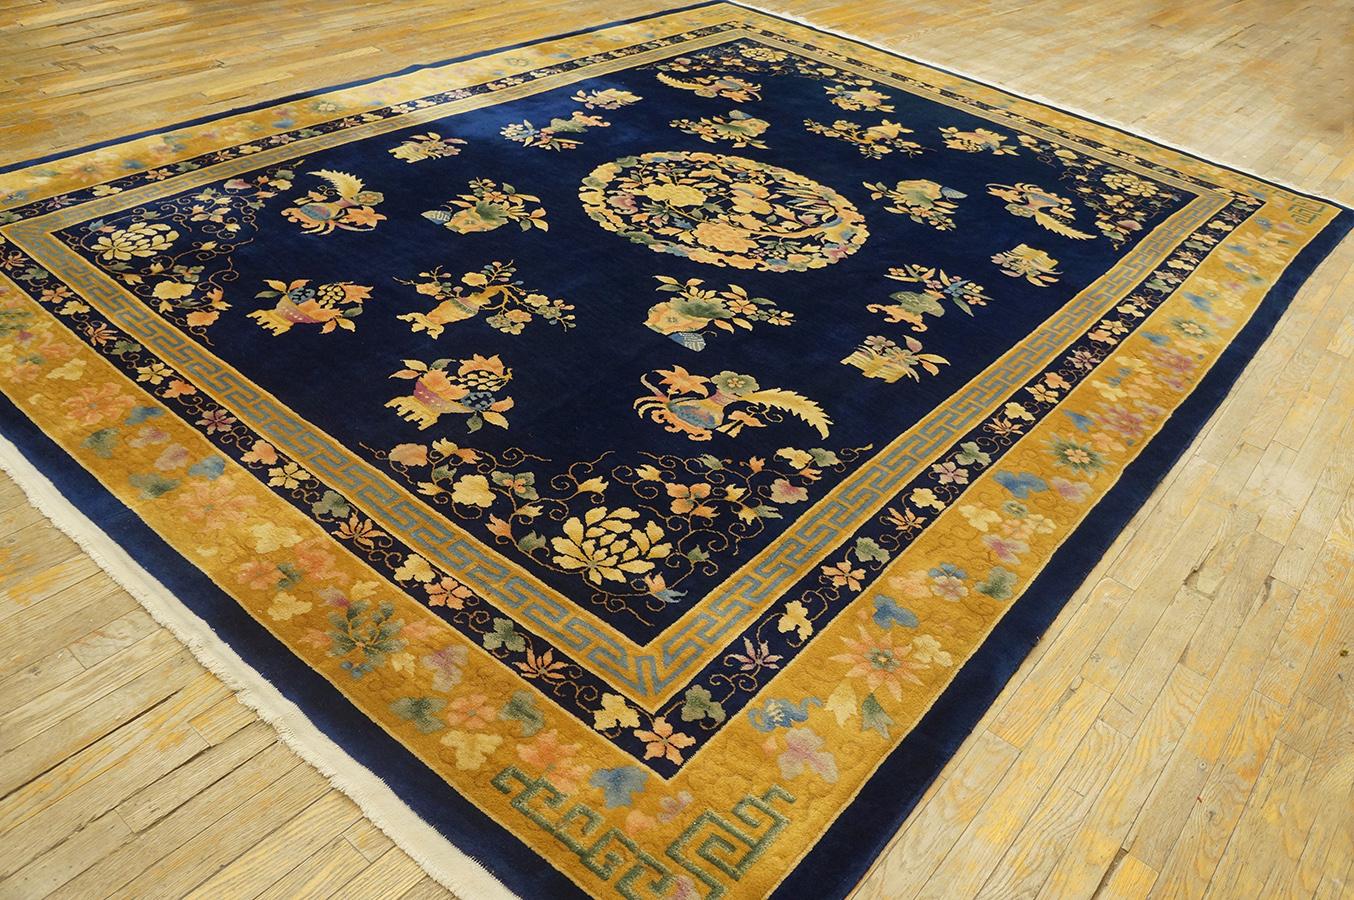 Hand-Knotted 1920s Chinese Art Deco Carpet ( 8' 9'' x 11' 6'' - 266 x 350 cm ) For Sale